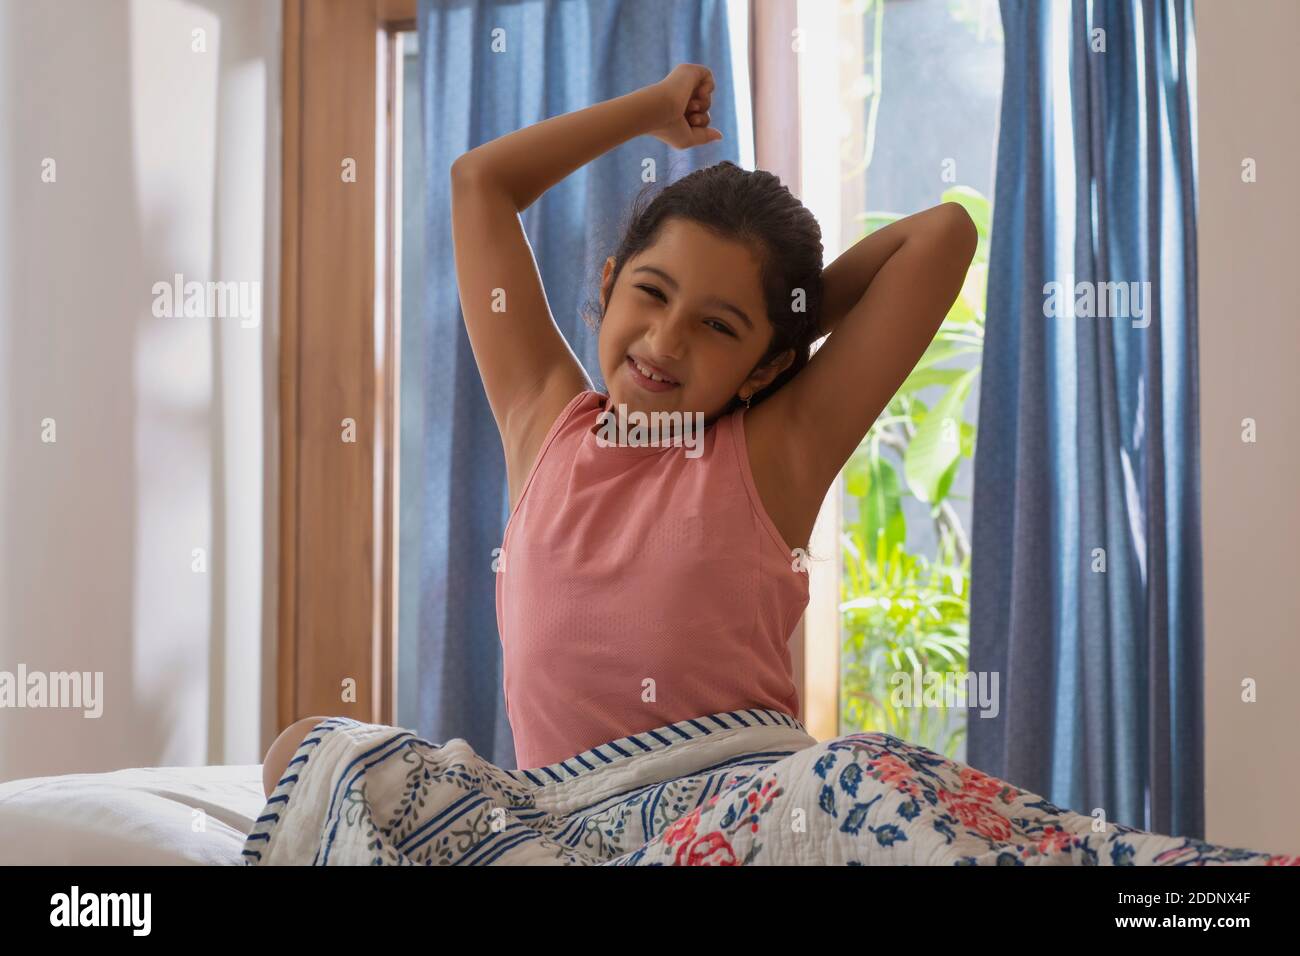 Young girl sitting on bed stretching in the early morning hours of the day Stock Photo